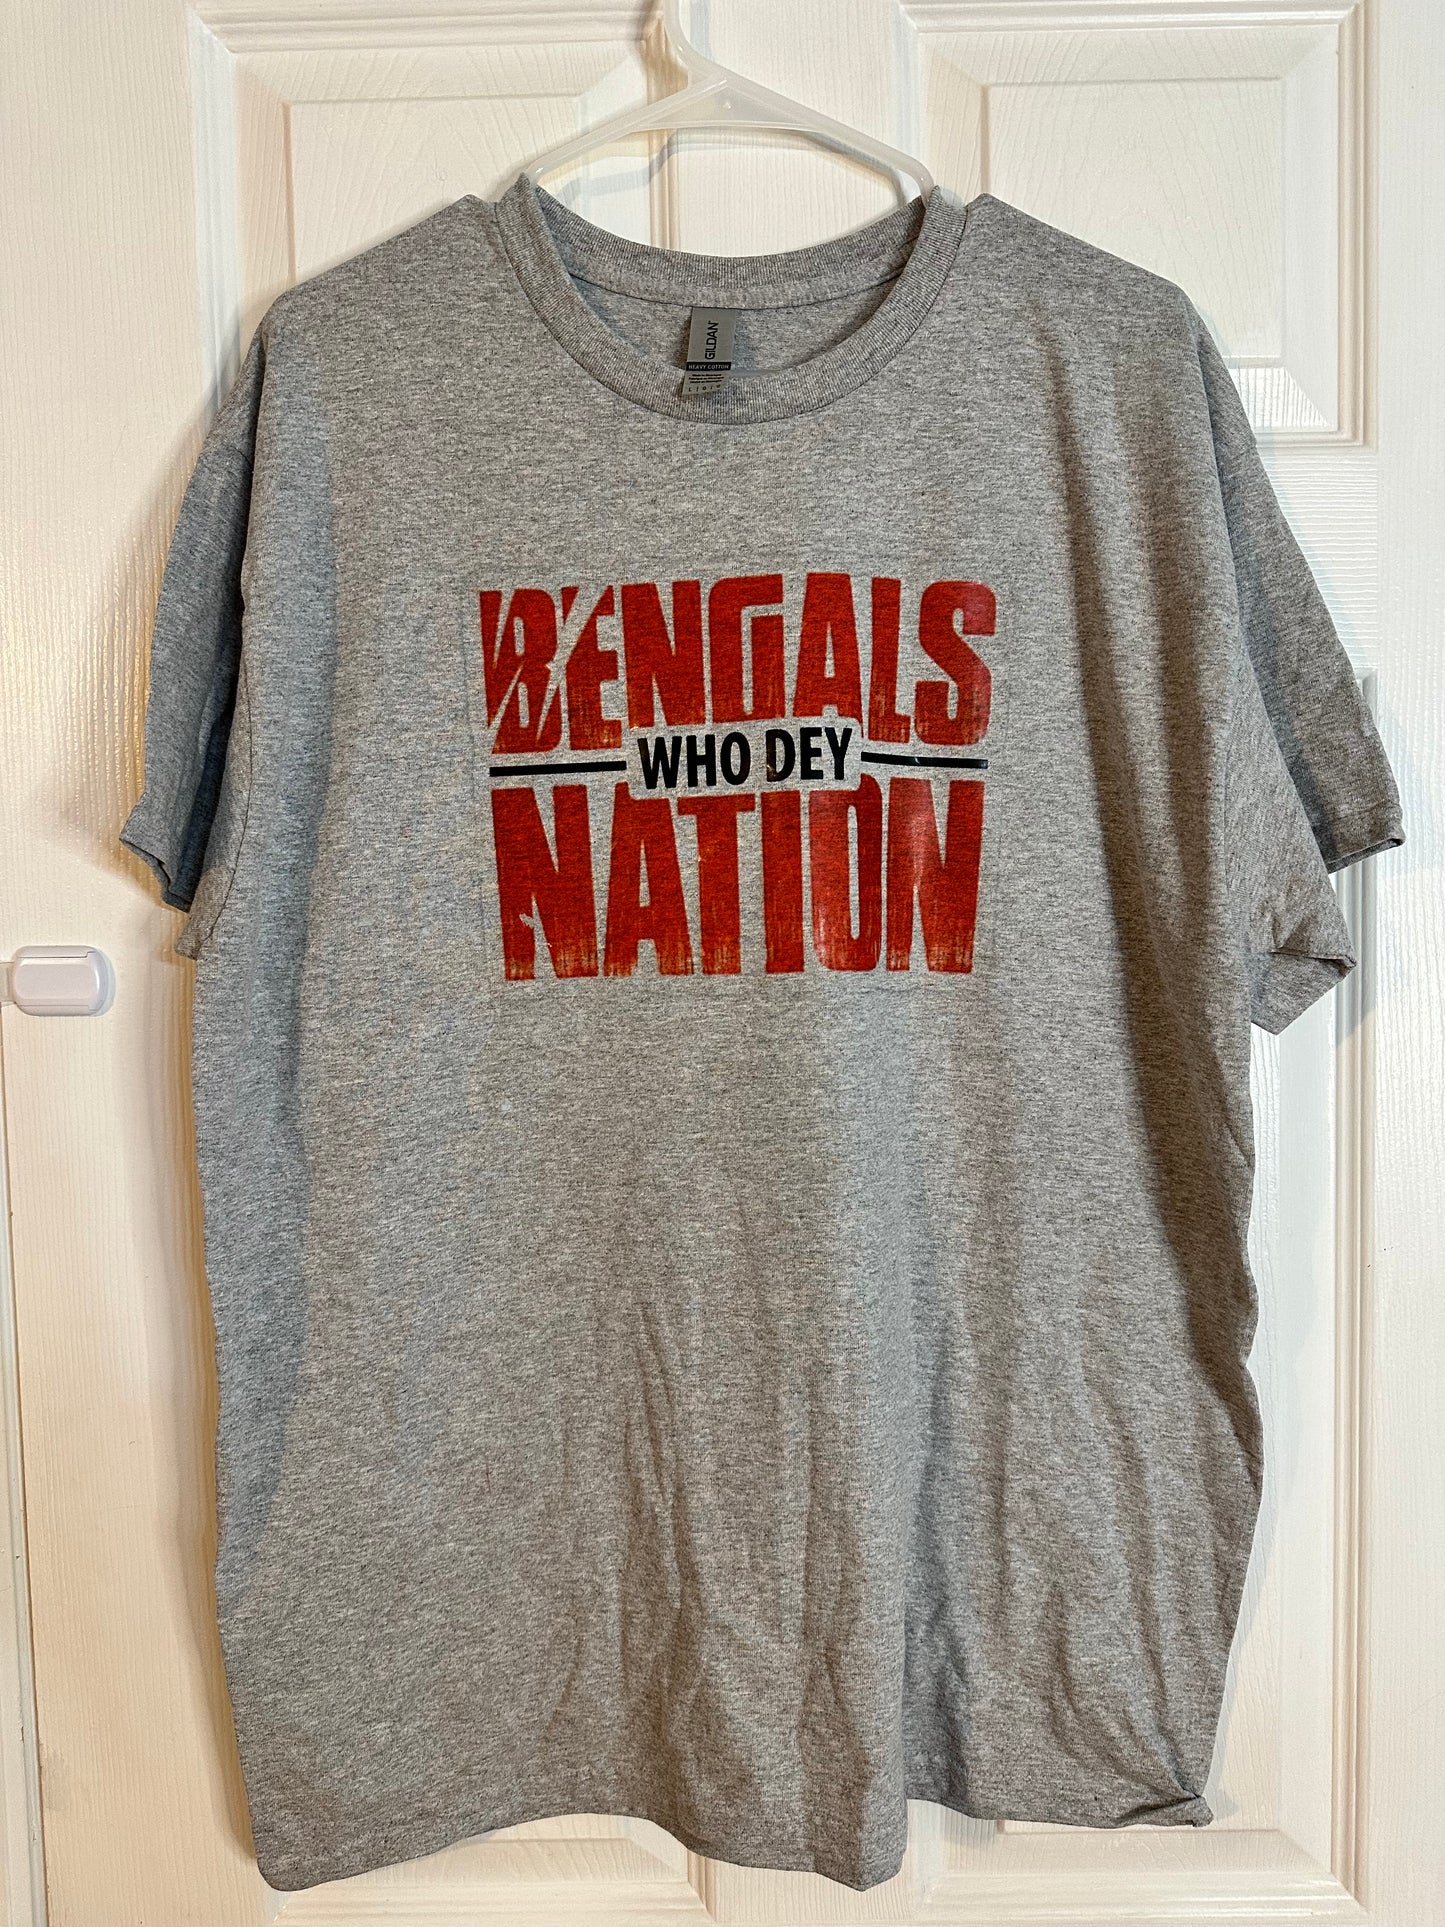 *REDUCED* Large Bengal’s T-Shirt